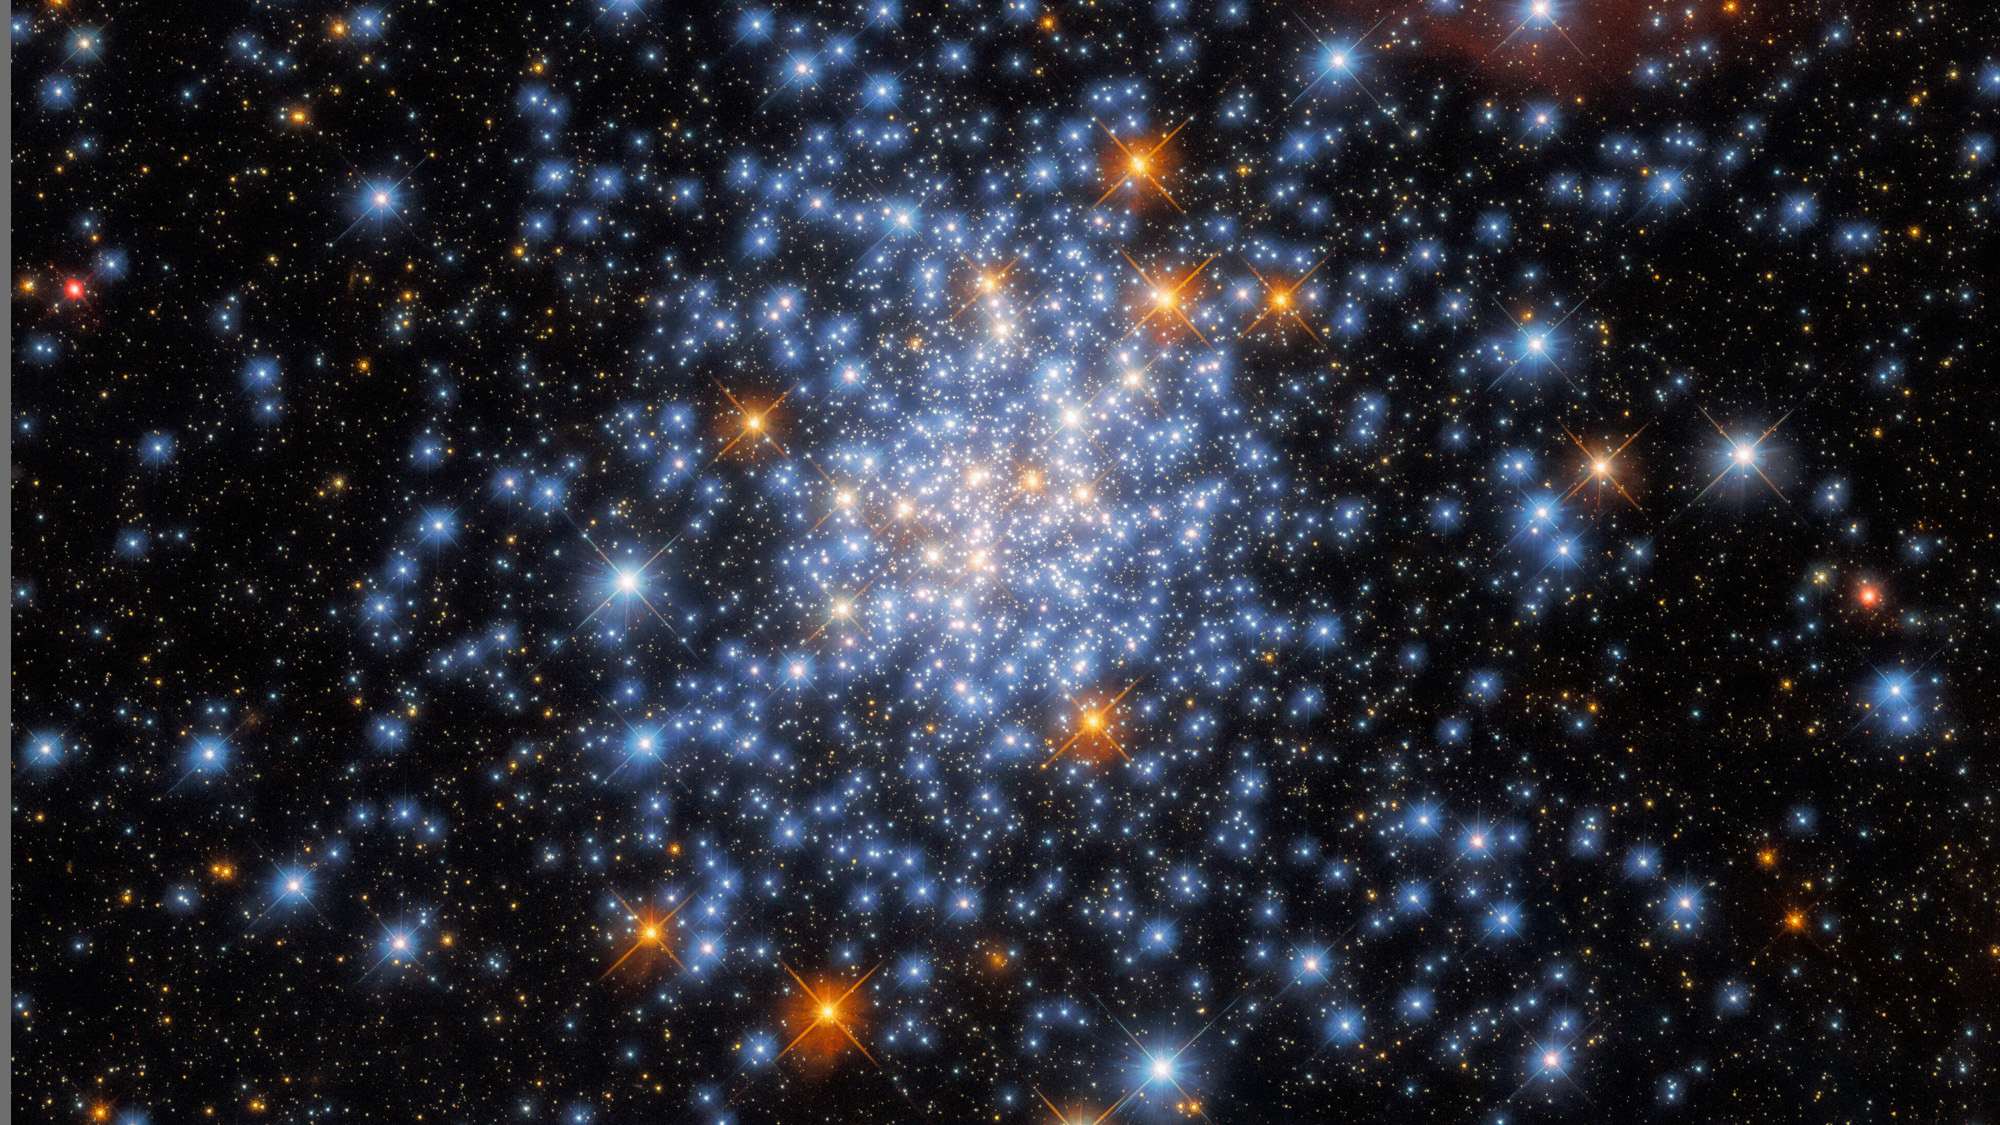 Blue stars: The biggest and brightest stars in the galaxy